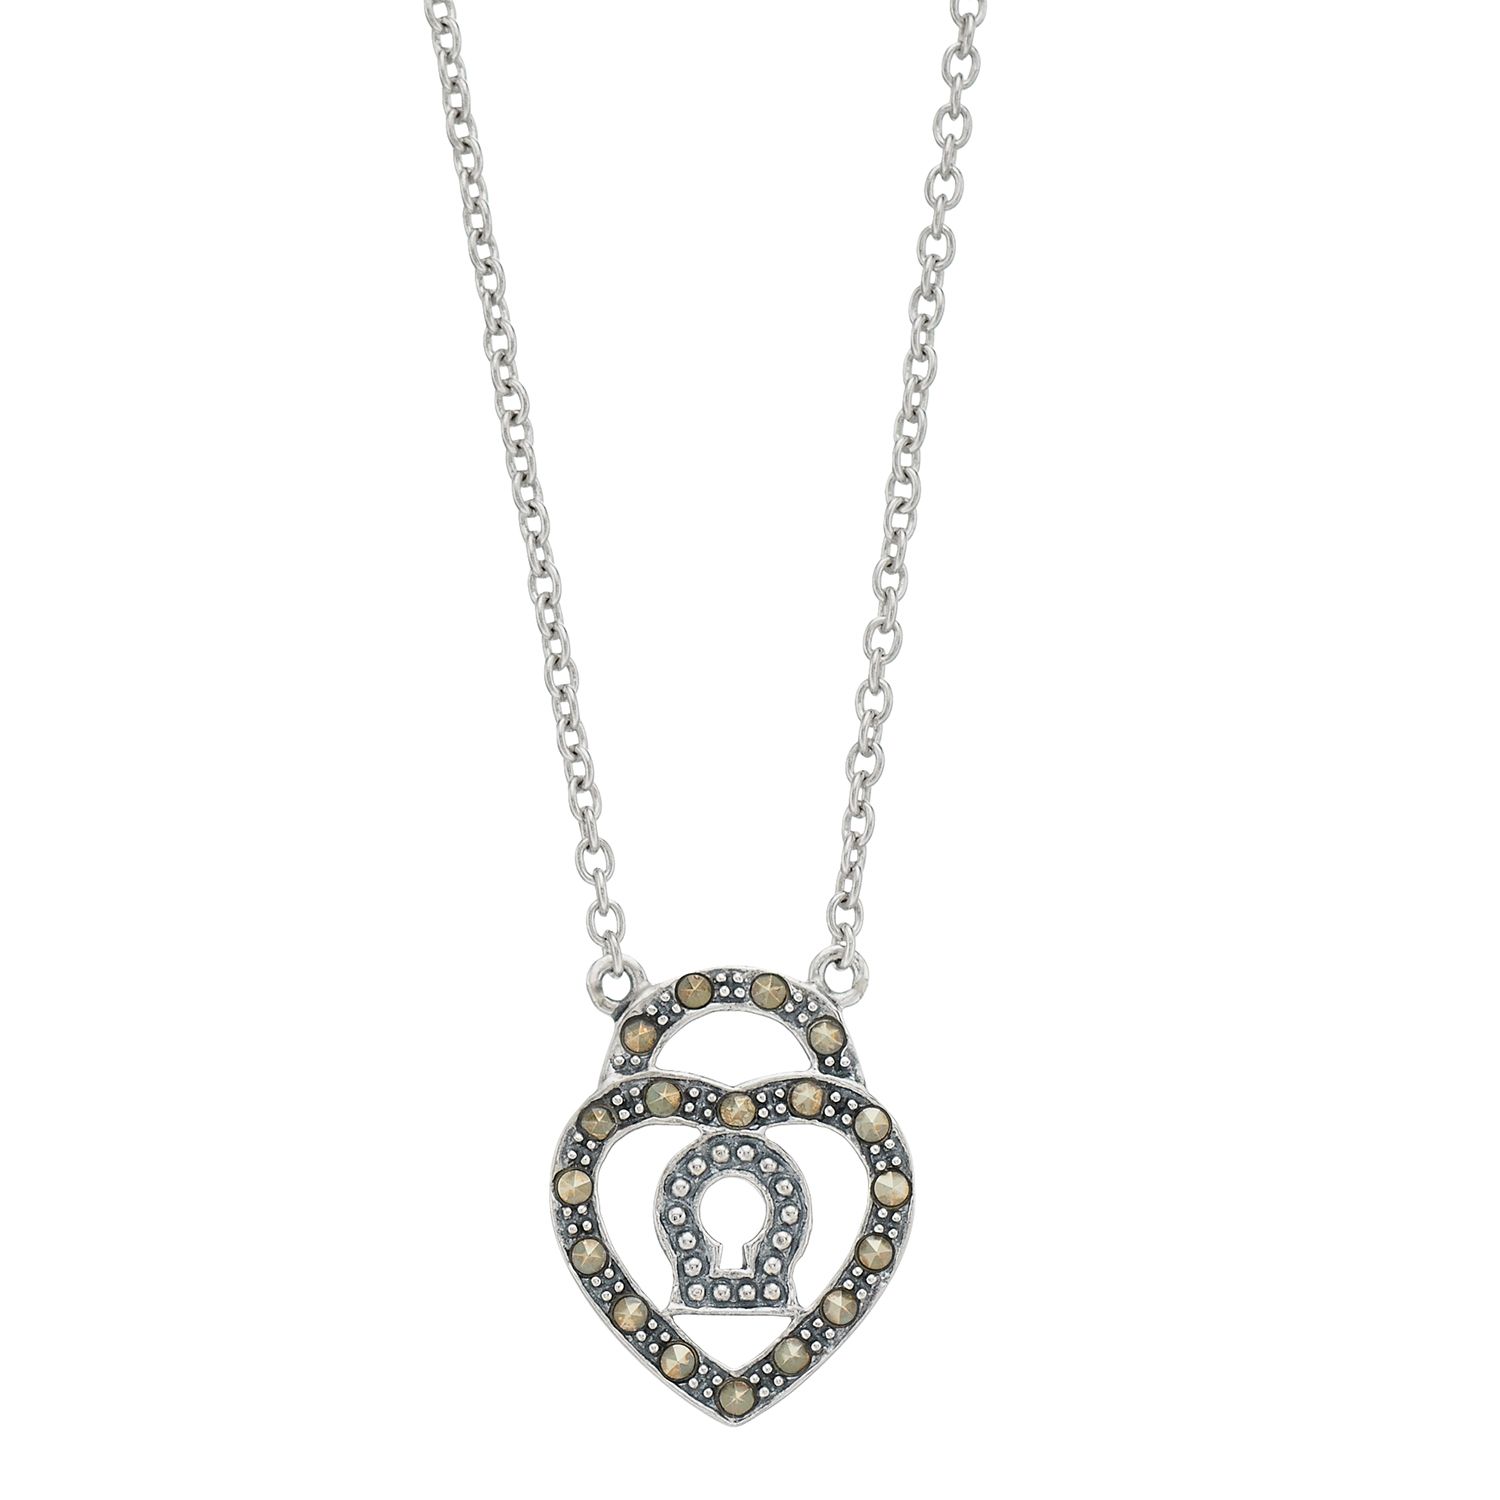 Image for Lavish by TJM Sterling Silver Marcasite Heart Lock Pendant Necklace at Kohl's.